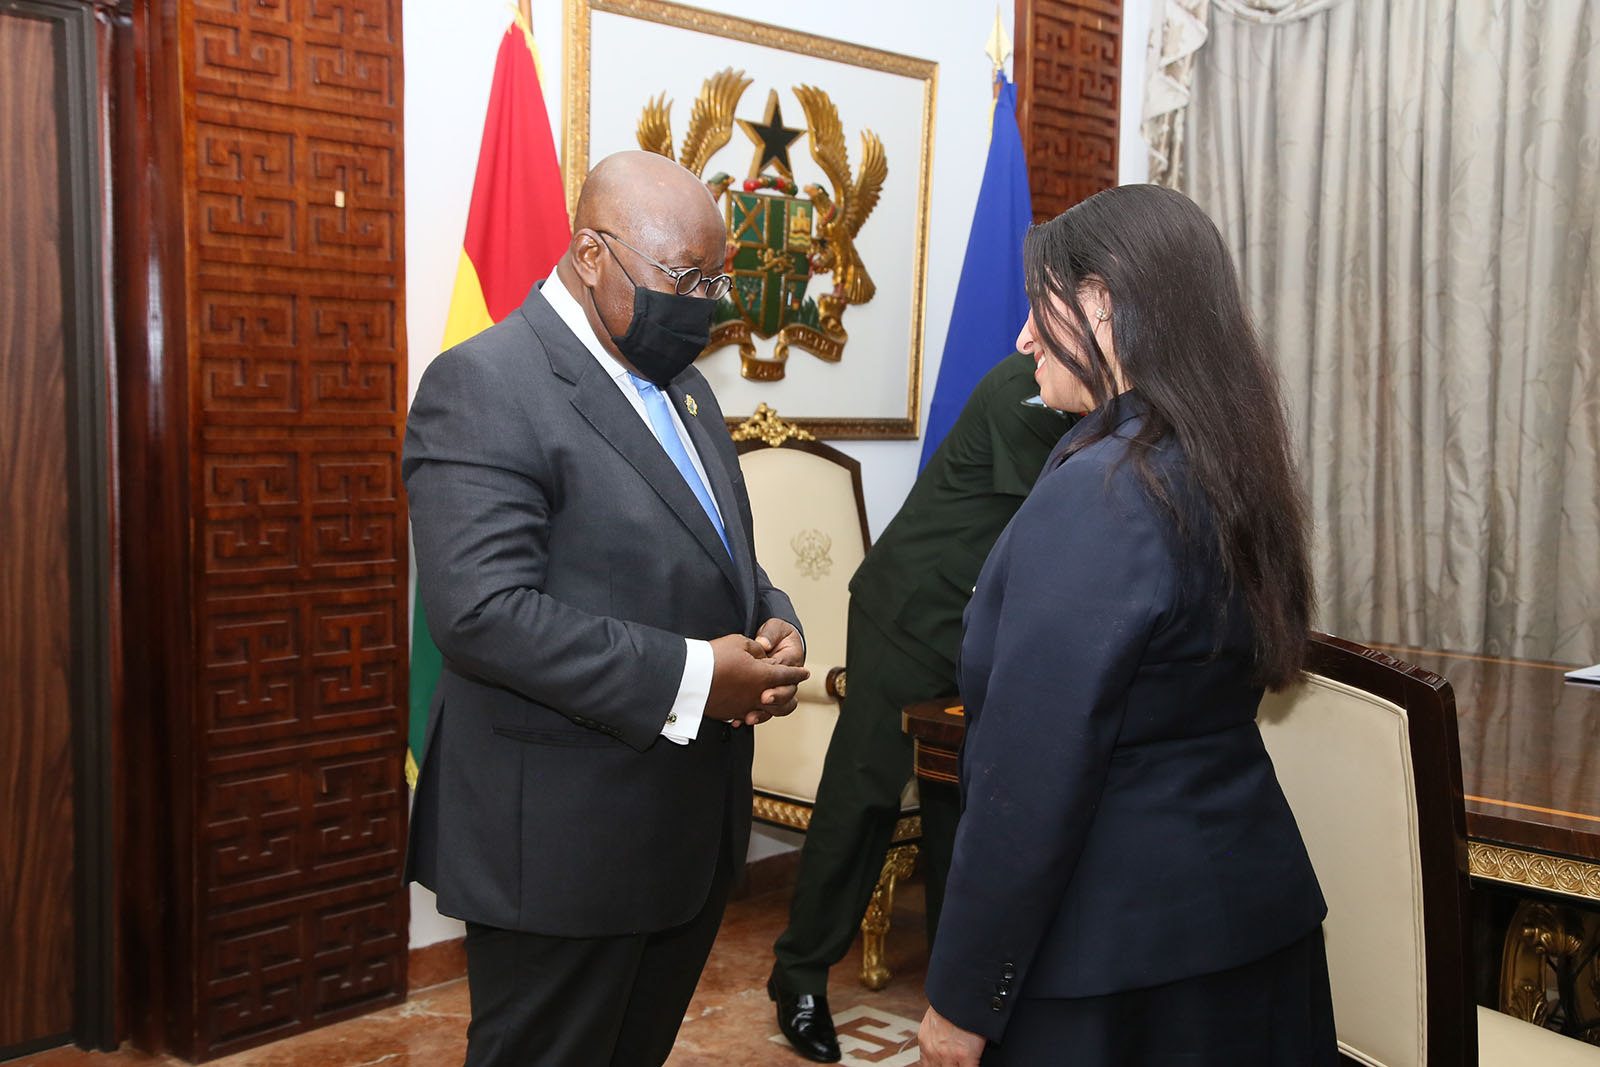 President Akufo-Addo welcoming Ms Priti Sushil Patel, UK Home Secretary to the Jubilee House for a meeting. PICTURES BY SAMUEL TEI ADANO